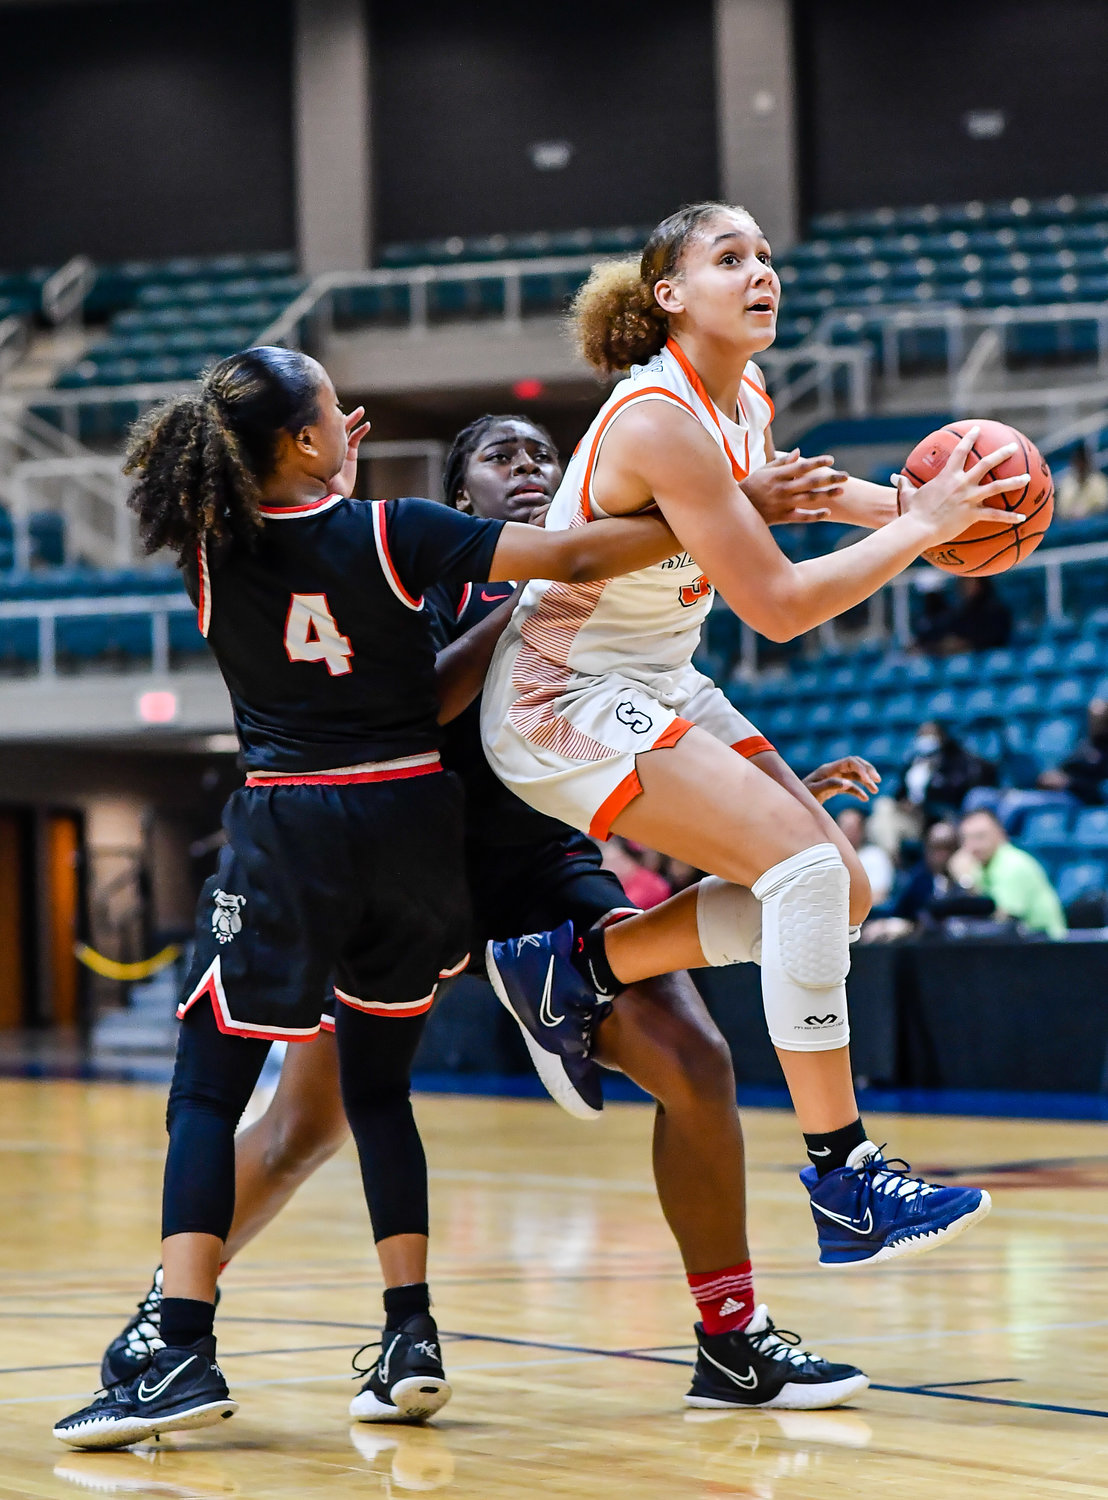 Katy Tx. Feb 22, 2022:  Seven Lakes Justice Carlton #30 drives to the basket during the Regional Quarterfinal playoff game, Seven Lakes vs Fort Bend Austin at the Merrell Center. (Photo by Mark Goodman / Katy Times)